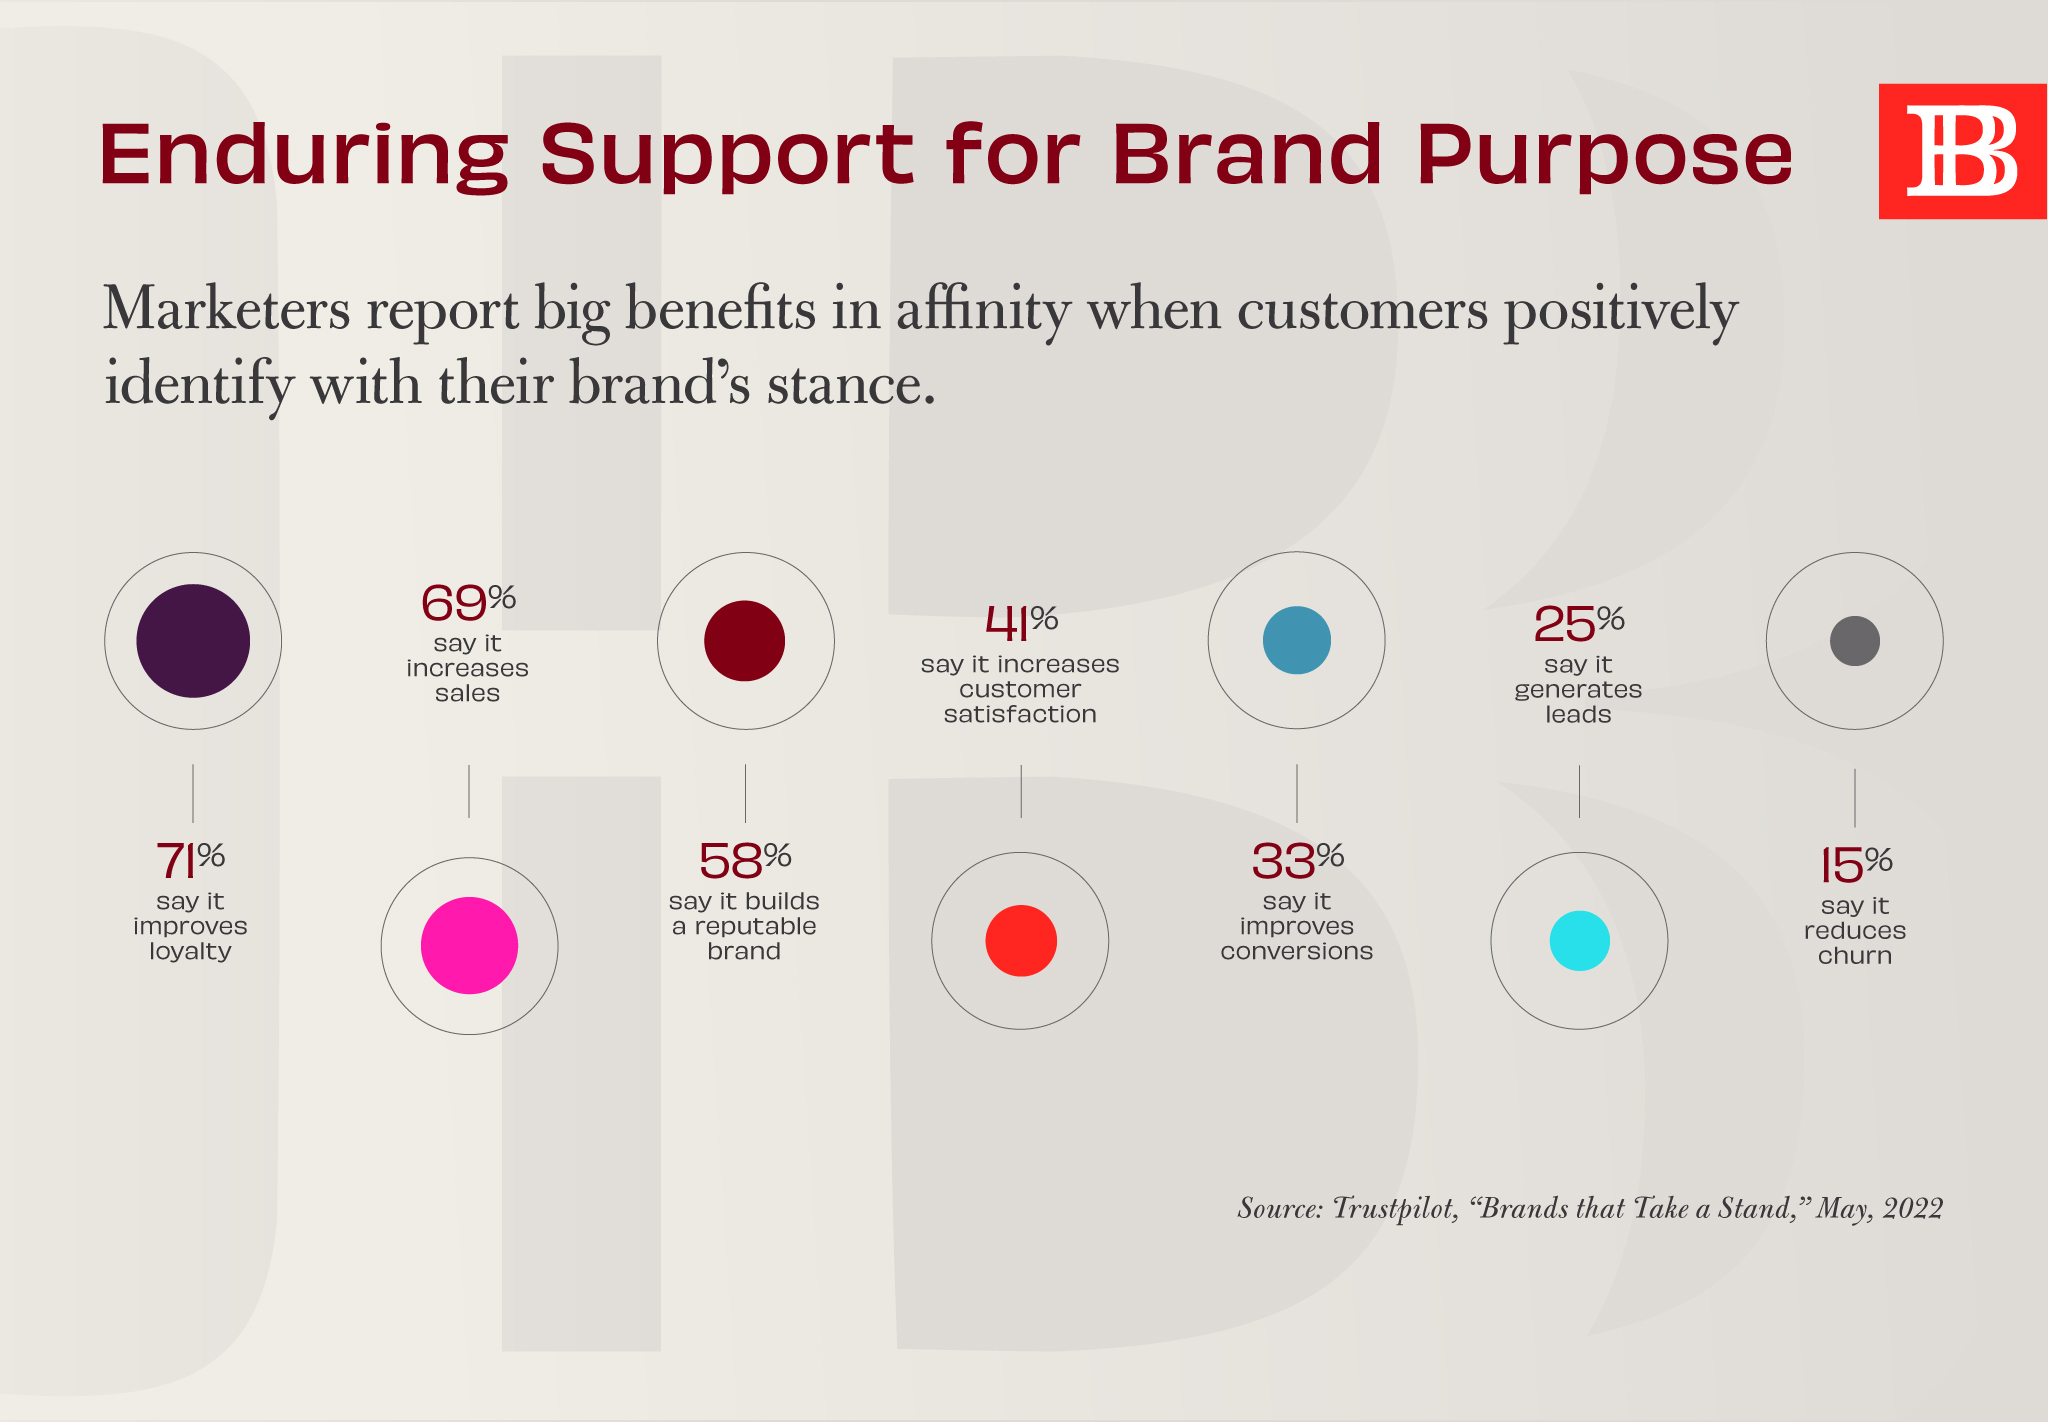 Marketers report big benefits in affinity when customers positively identify with their brand’s stance.